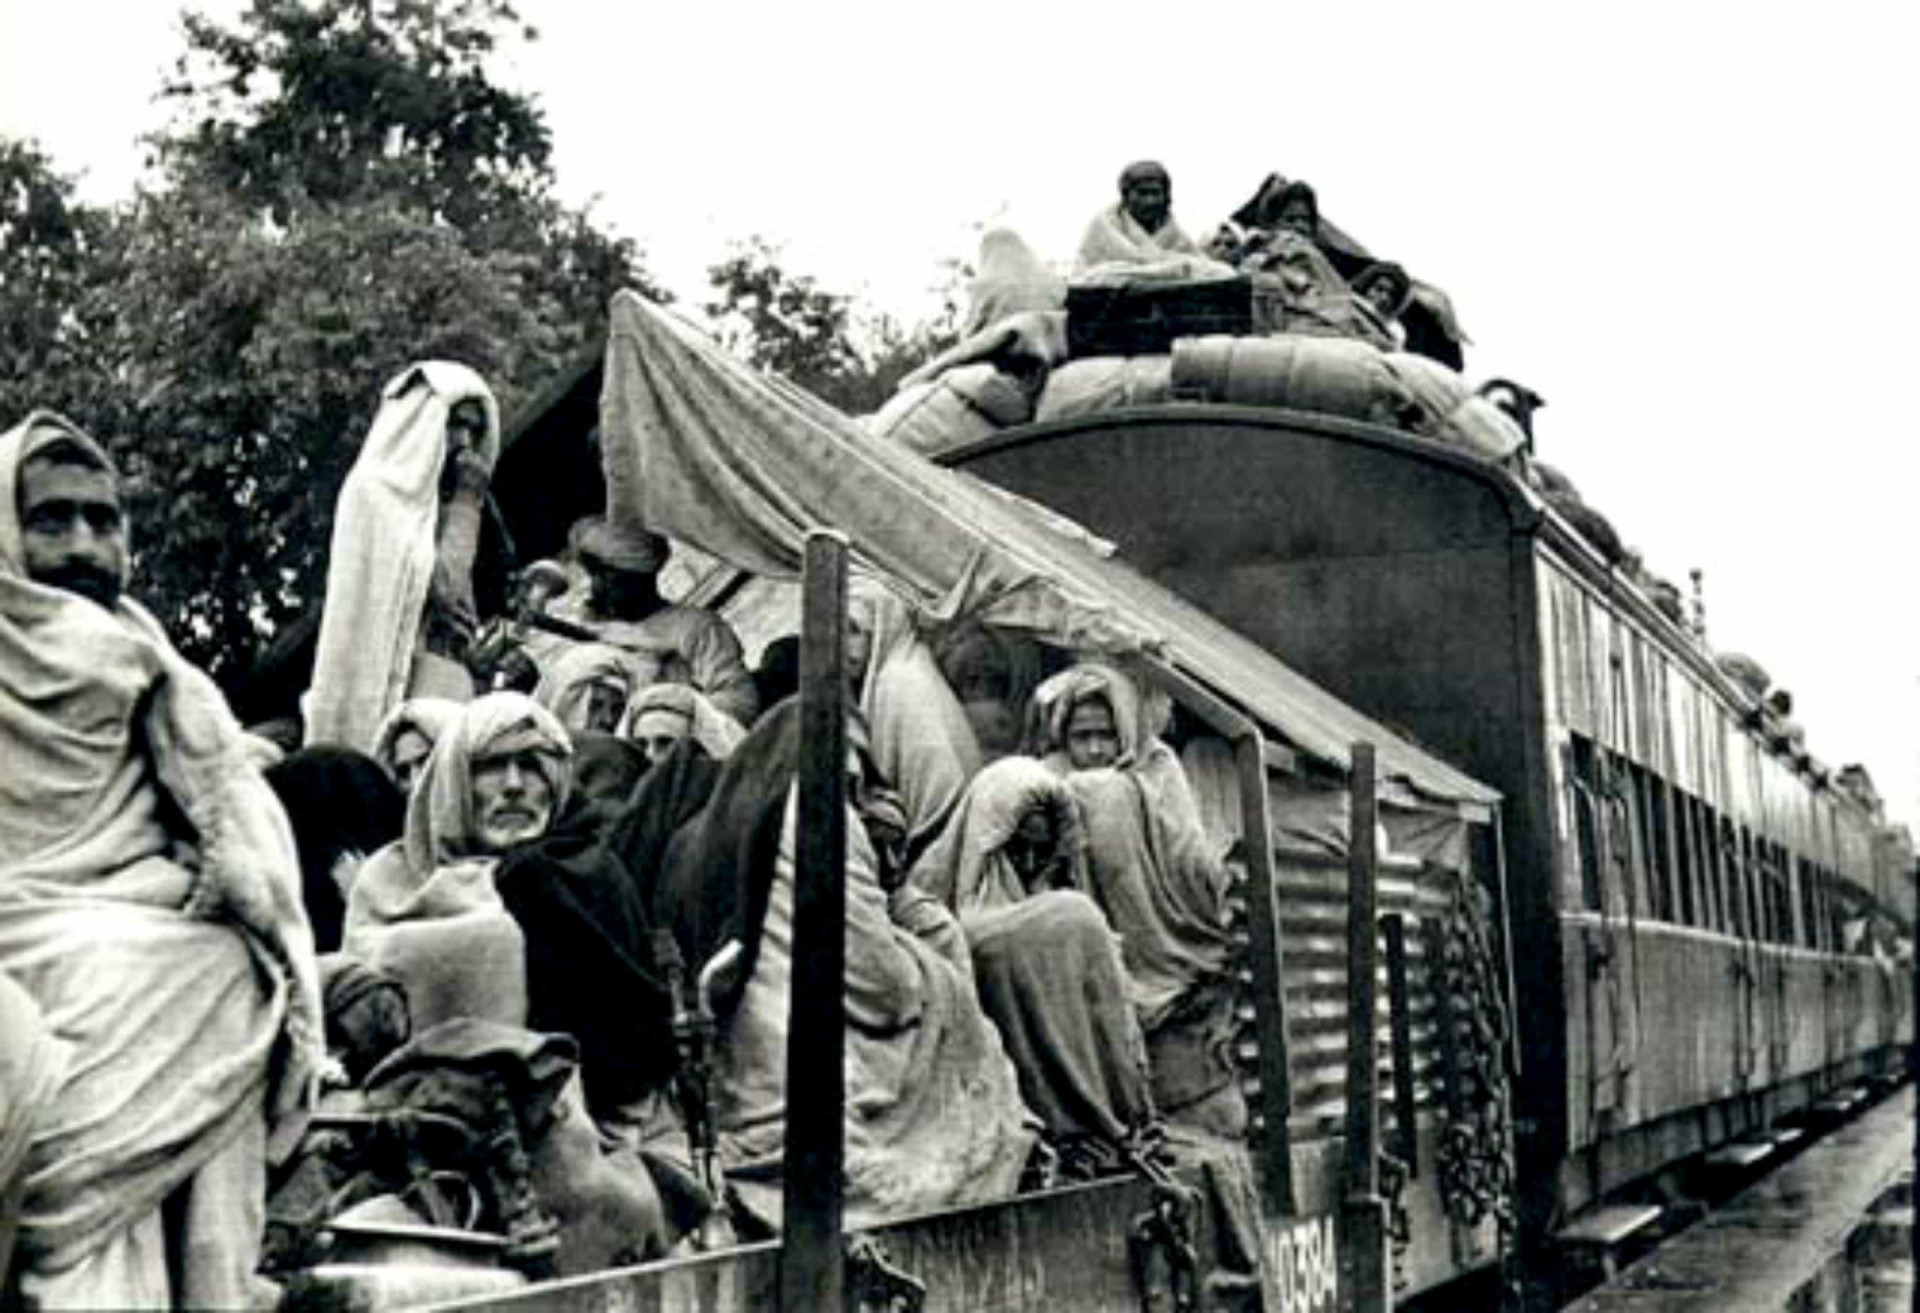 <p>The Partition of India of 1947 was the division of British India into two independent dominion states, India and Pakistan. The partition displaced between 10–12 million people along religious lines, and created an overwhelming refugee crisis. Large-scale violence ensued, with several hundred thousand people losing their lives. Pictured is a crowded refugee train on its way to Punjab, Pakistan. Many Hindi nationalists held Gandhi responsible for the frenzy of violence and sufferings during the subcontinent's partition, and pointed towards his perceived compliance towards Muslims.</p><p><a href="https://www.msn.com/en-us/community/channel/vid-7xx8mnucu55yw63we9va2gwr7uihbxwc68fxqp25x6tg4ftibpra?cvid=94631541bc0f4f89bfd59158d696ad7e">Follow us and access great exclusive content every day</a></p>